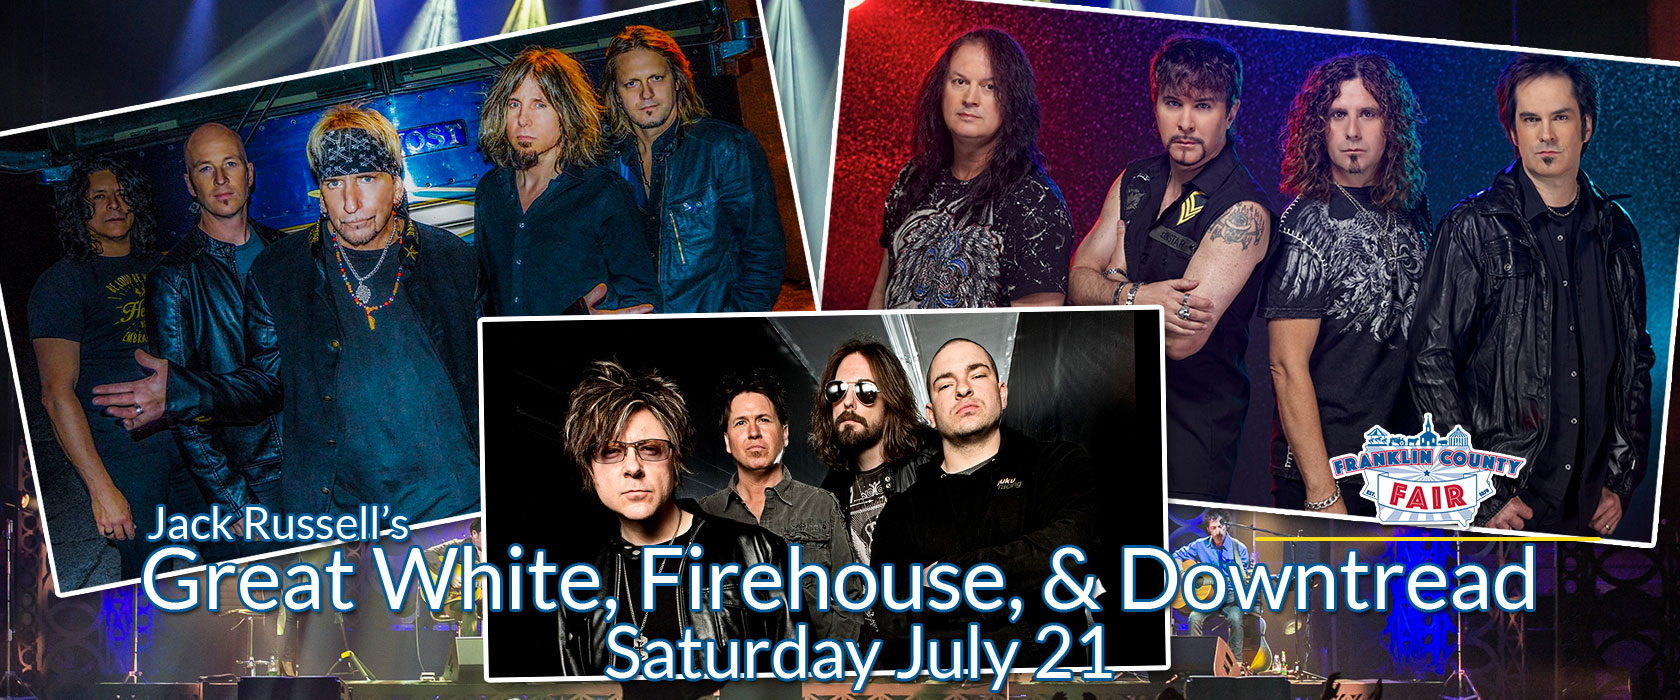 Franklin County Fair Jack Russell's Great White & Firehouse - Saturday July 19